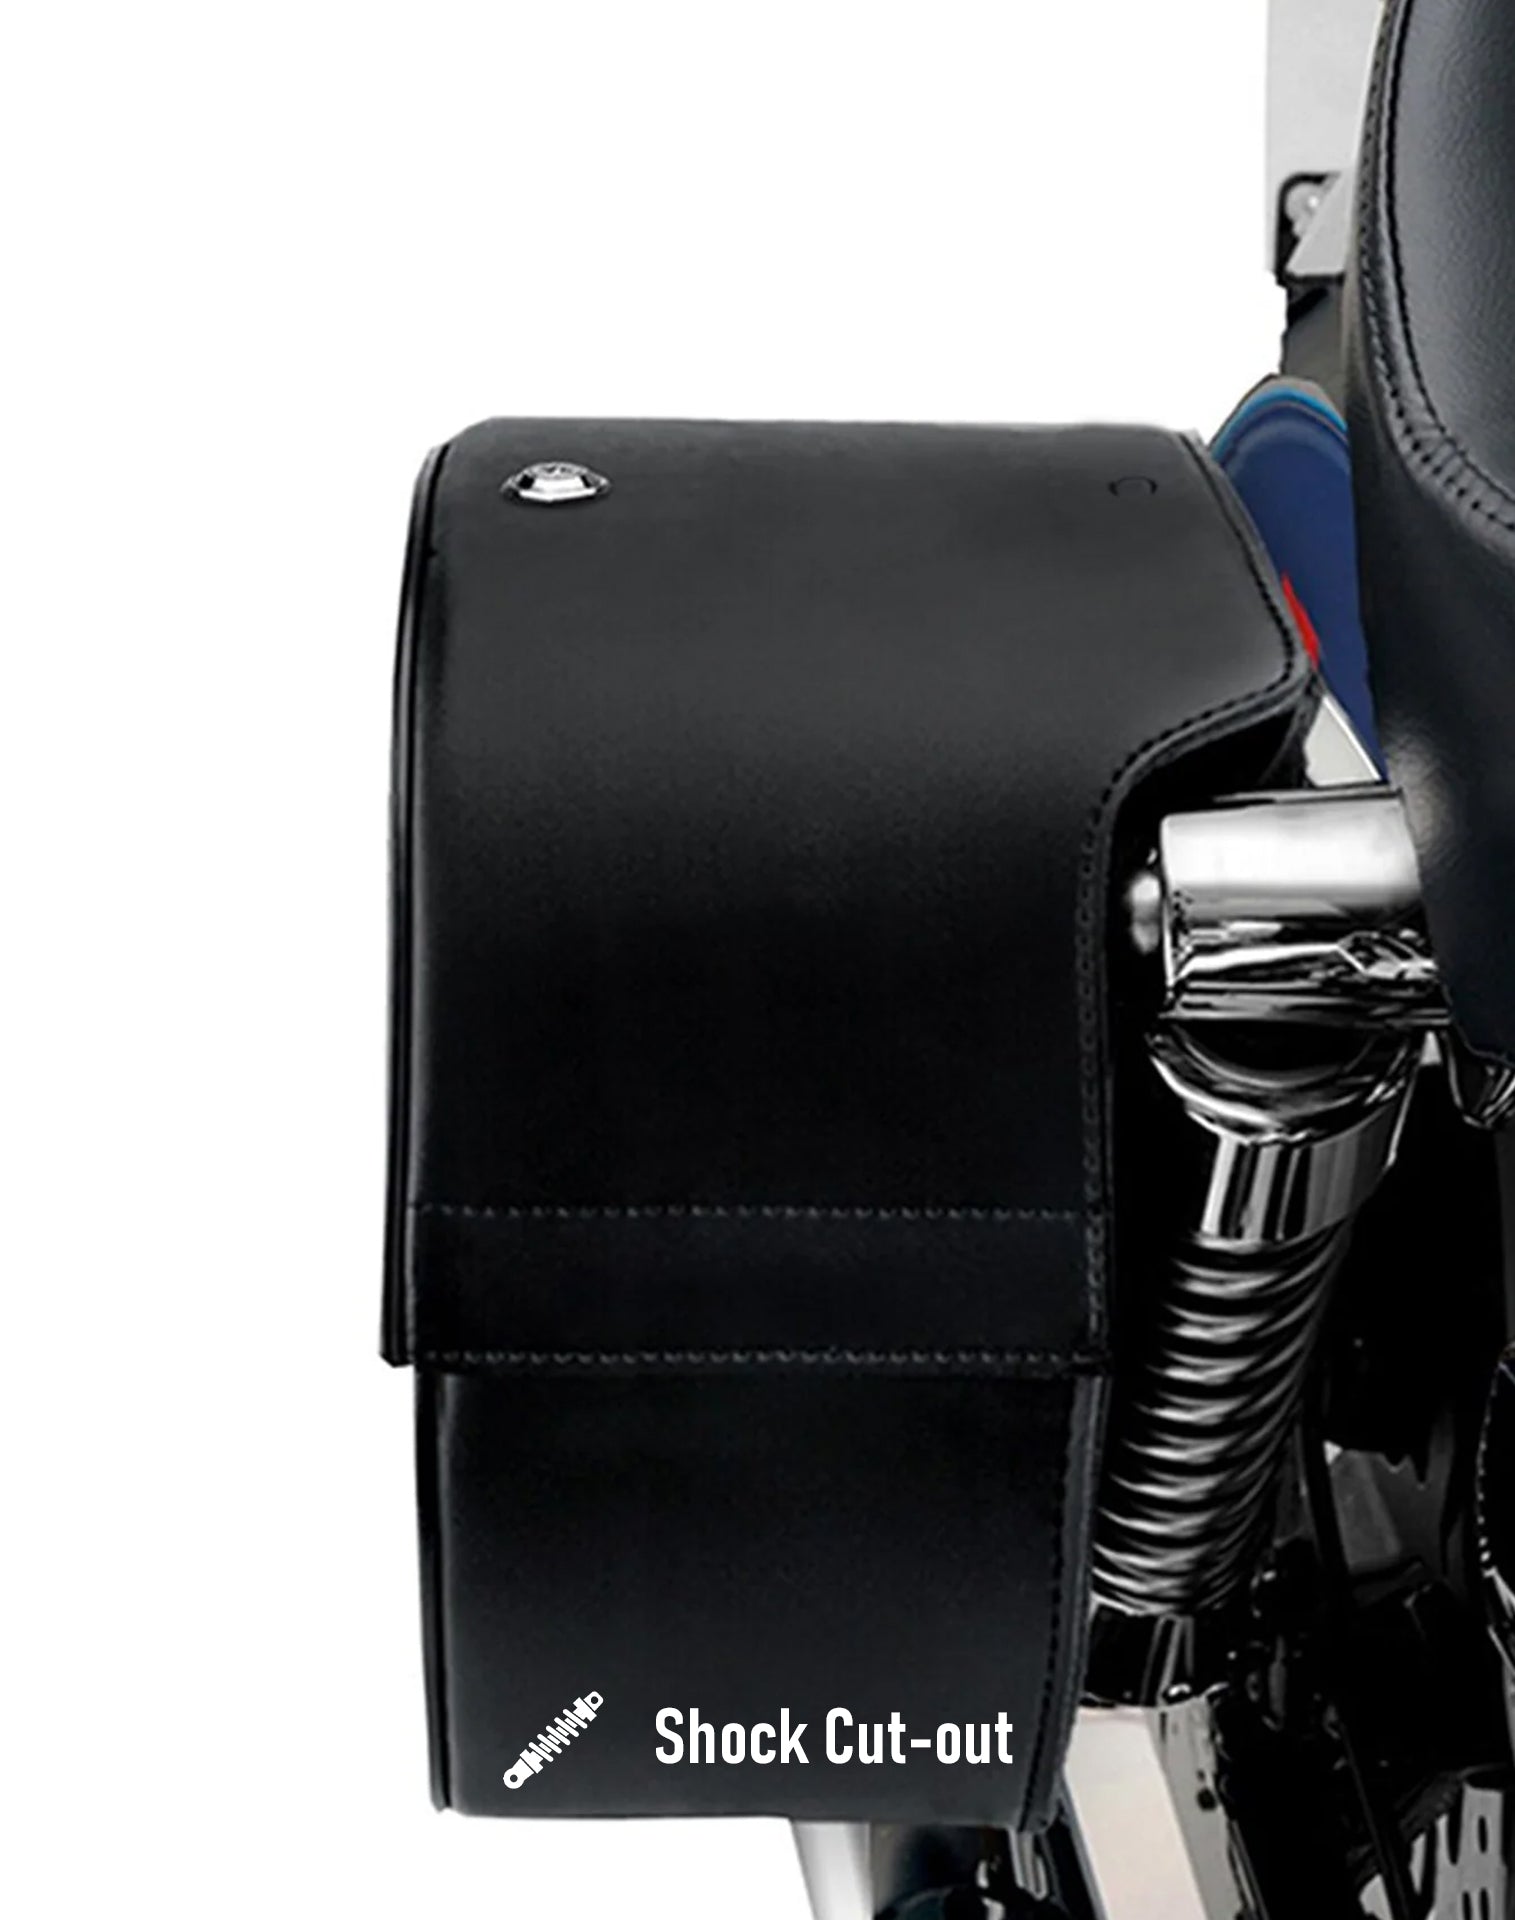 Viking Warrior Large Shock Cut Out Leather Motorcycle Saddlebags For Harley Sportster 48 Xl1200X Hard Shell Construction